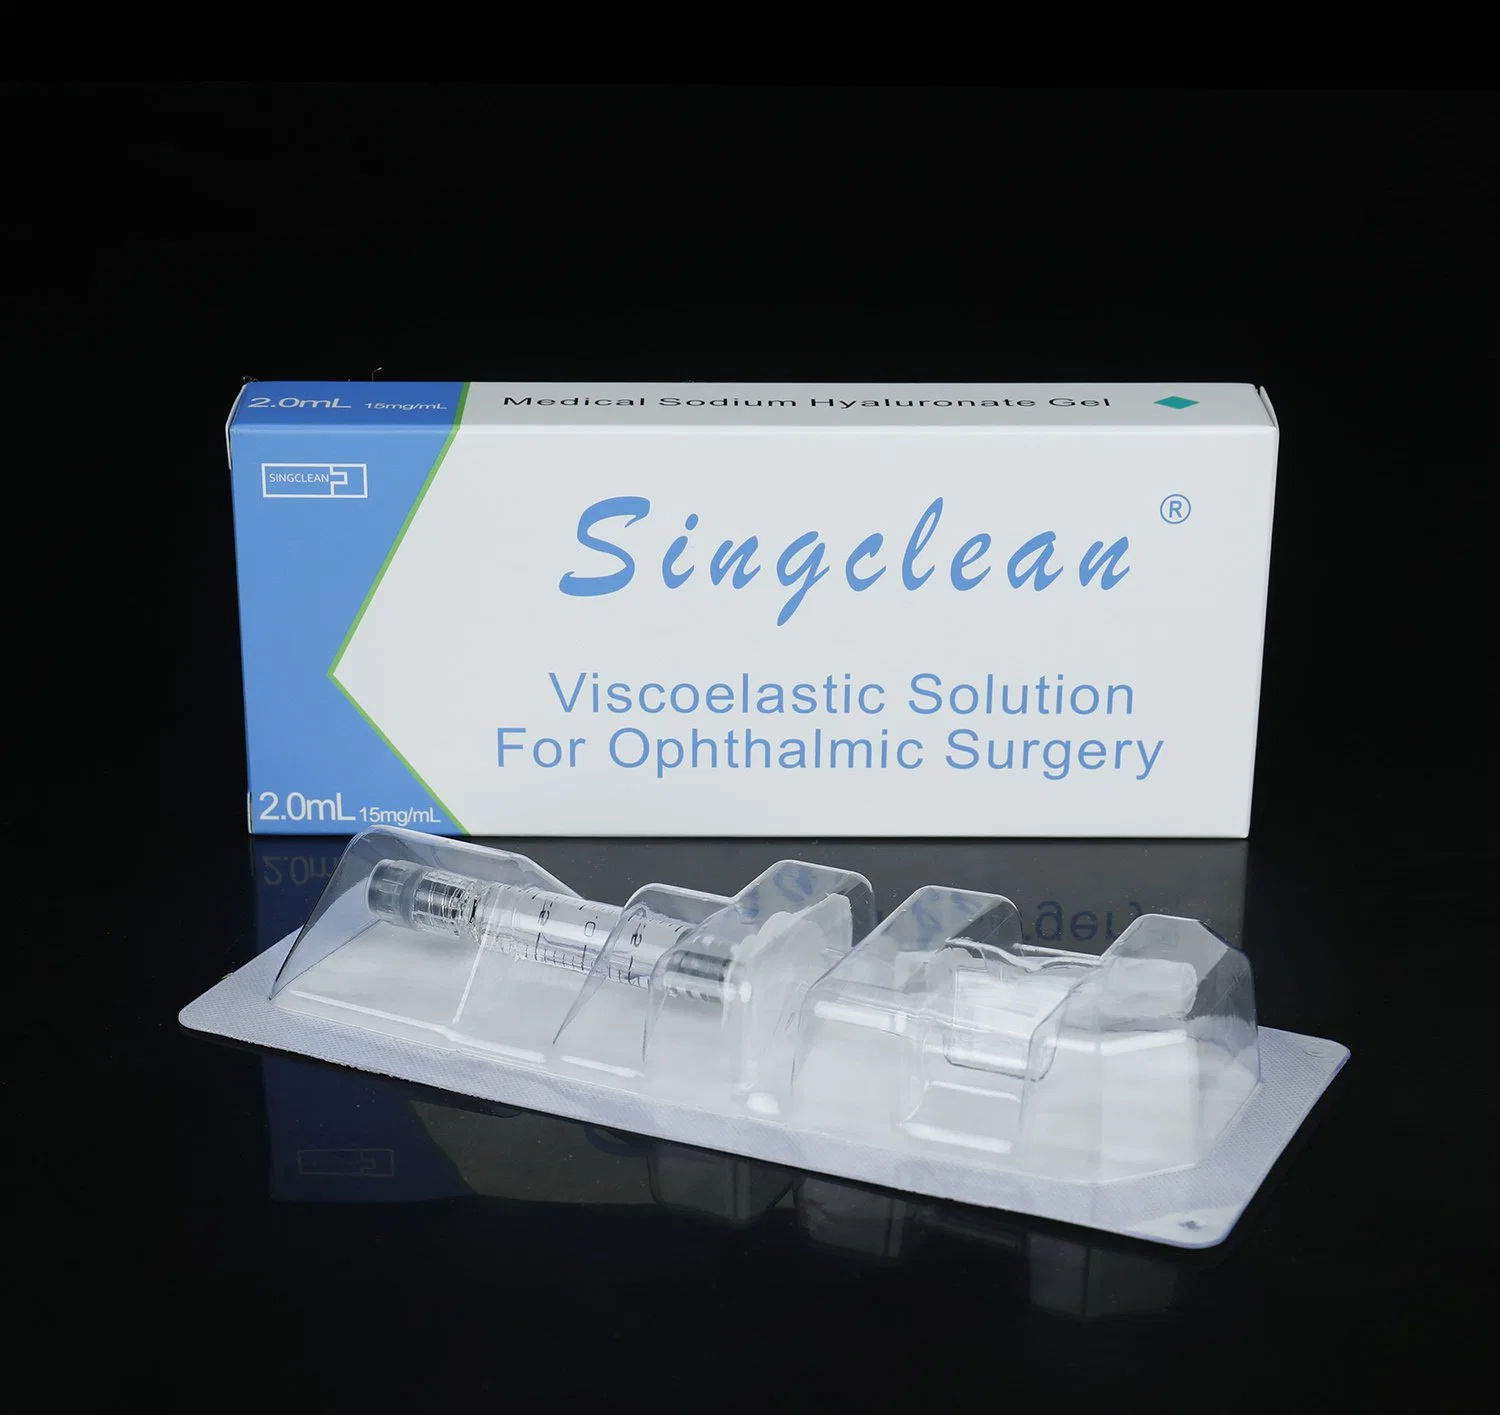 Suitable Singclean 1ml, 2ml, Bd Brand Syringe in Blister Cataract Extraction Surgery Viscoelastic for Adult